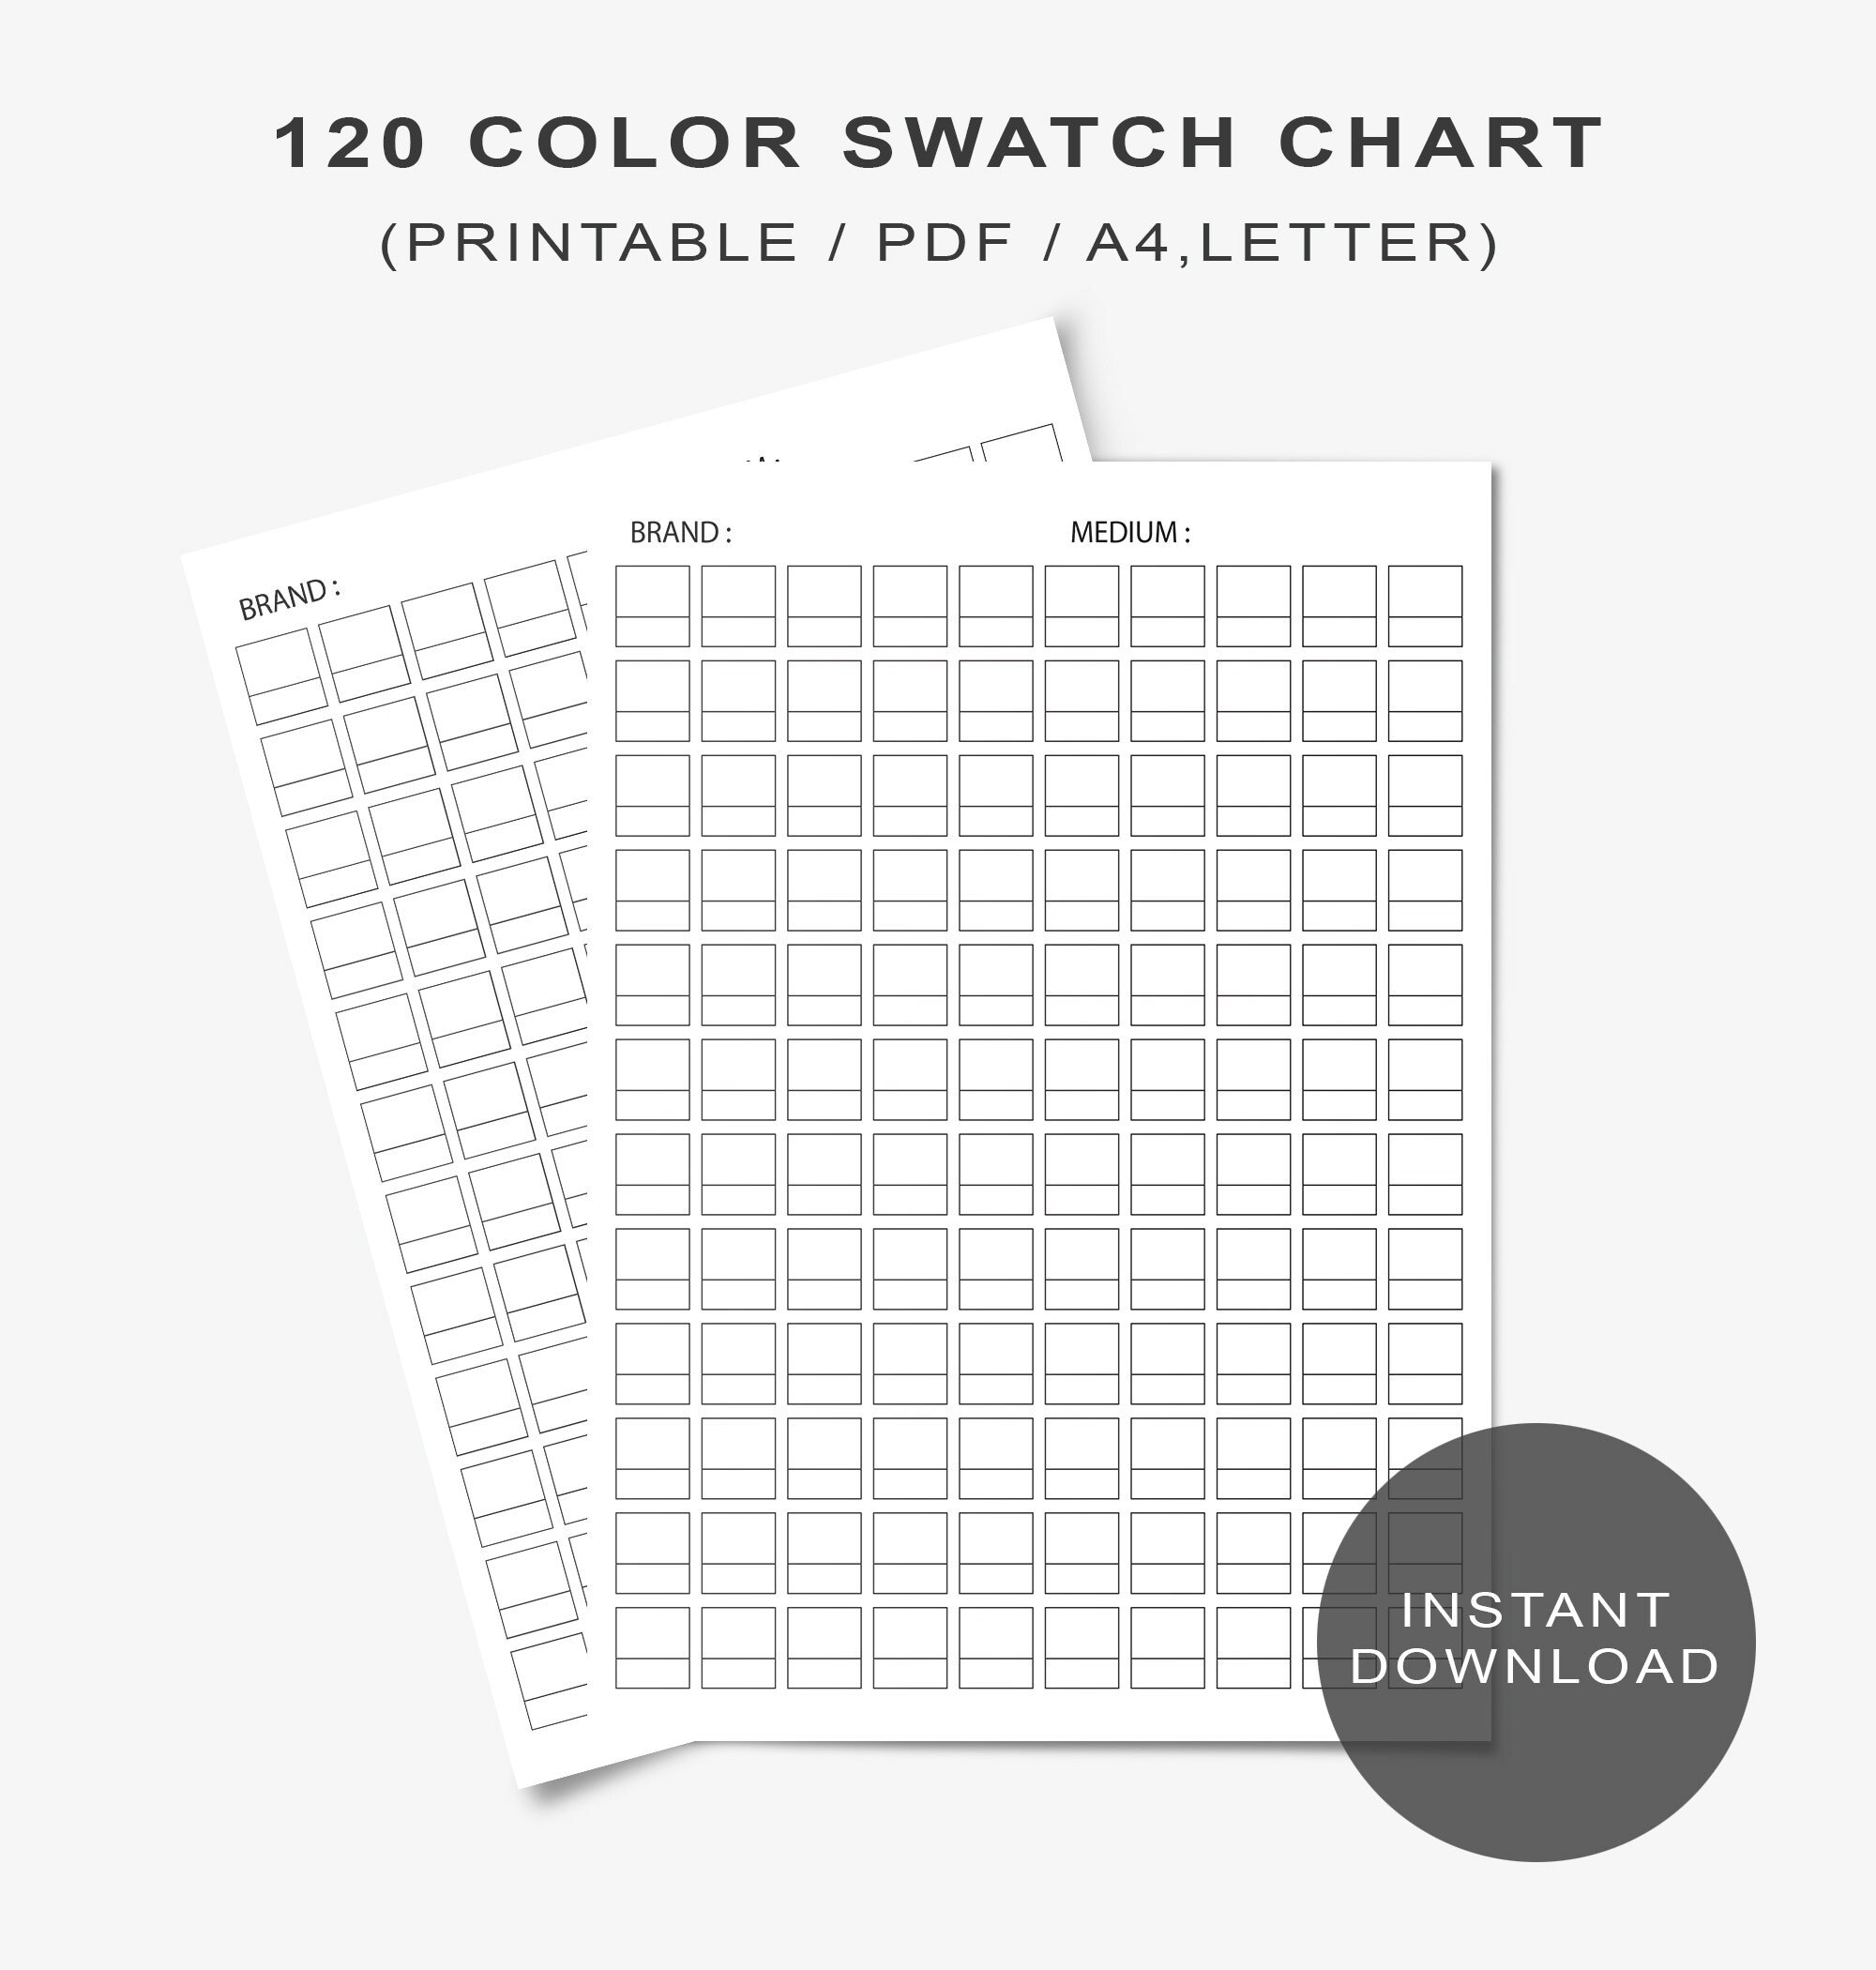 120-color-swatch-chart-digital-printable-120-color-swatch-chart